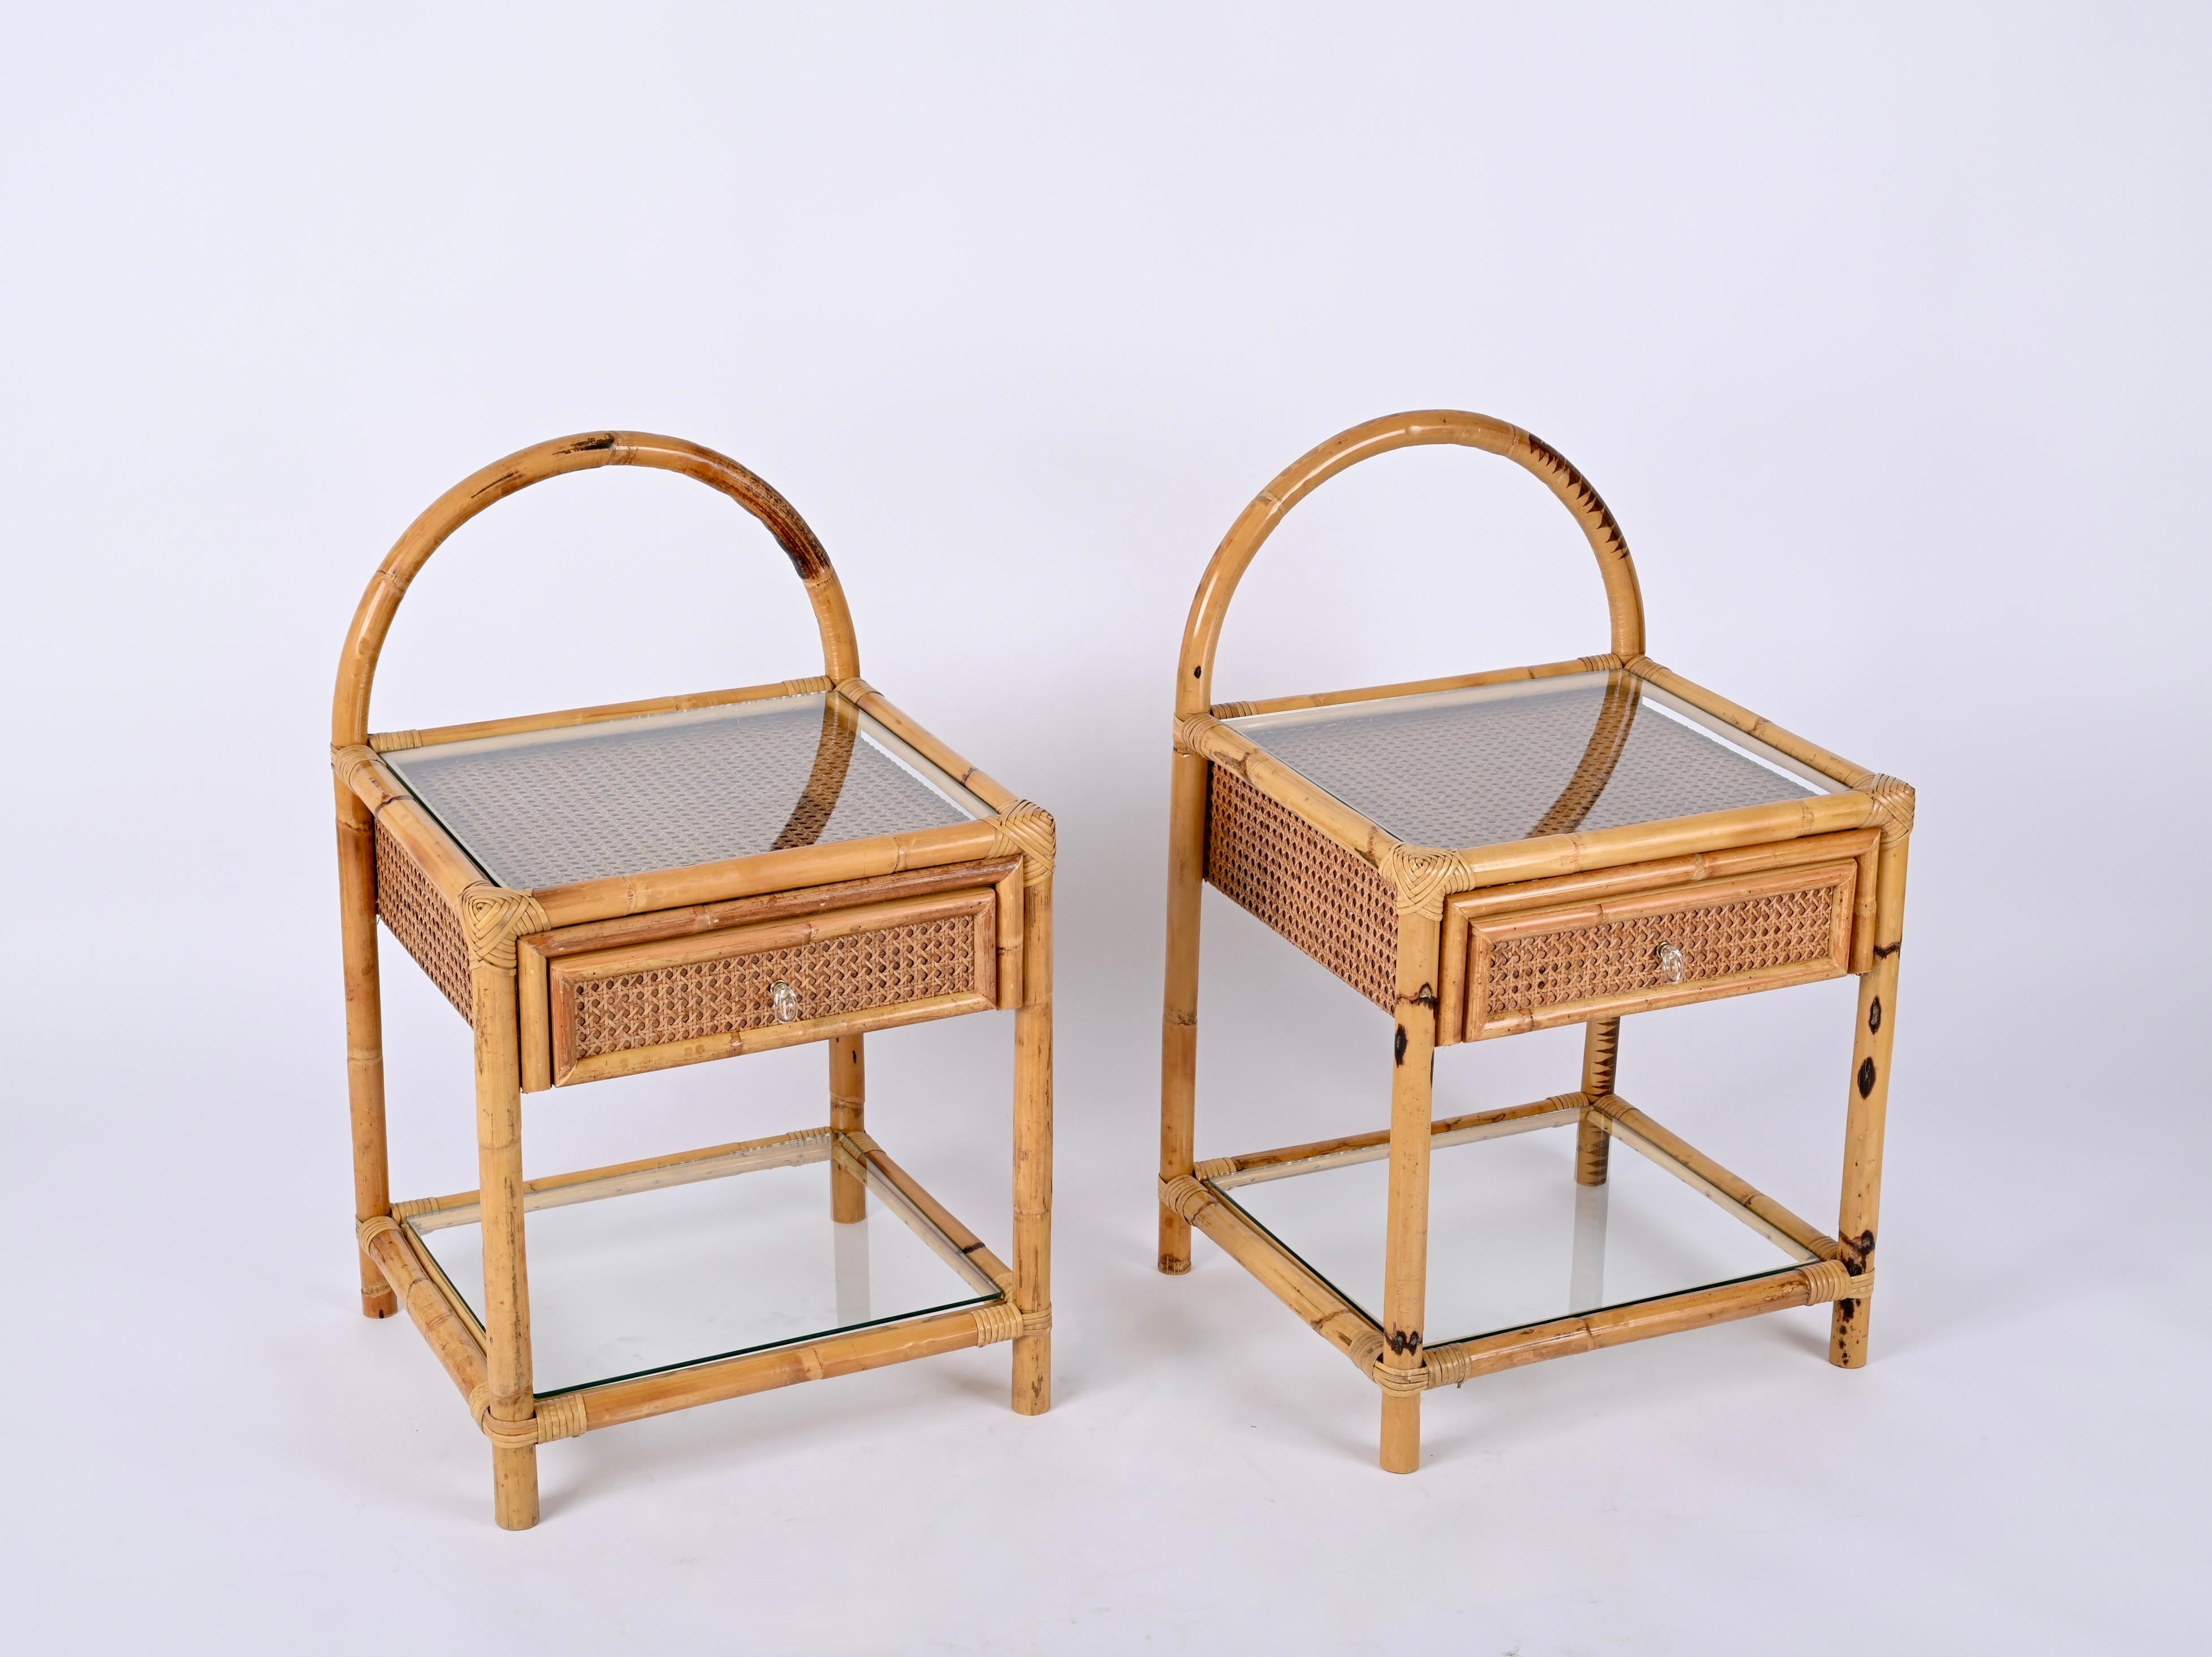 Pair of Mid-Century Bamboo, Rattan and Wicker Italian Bedside Tables, 1970s For Sale 5